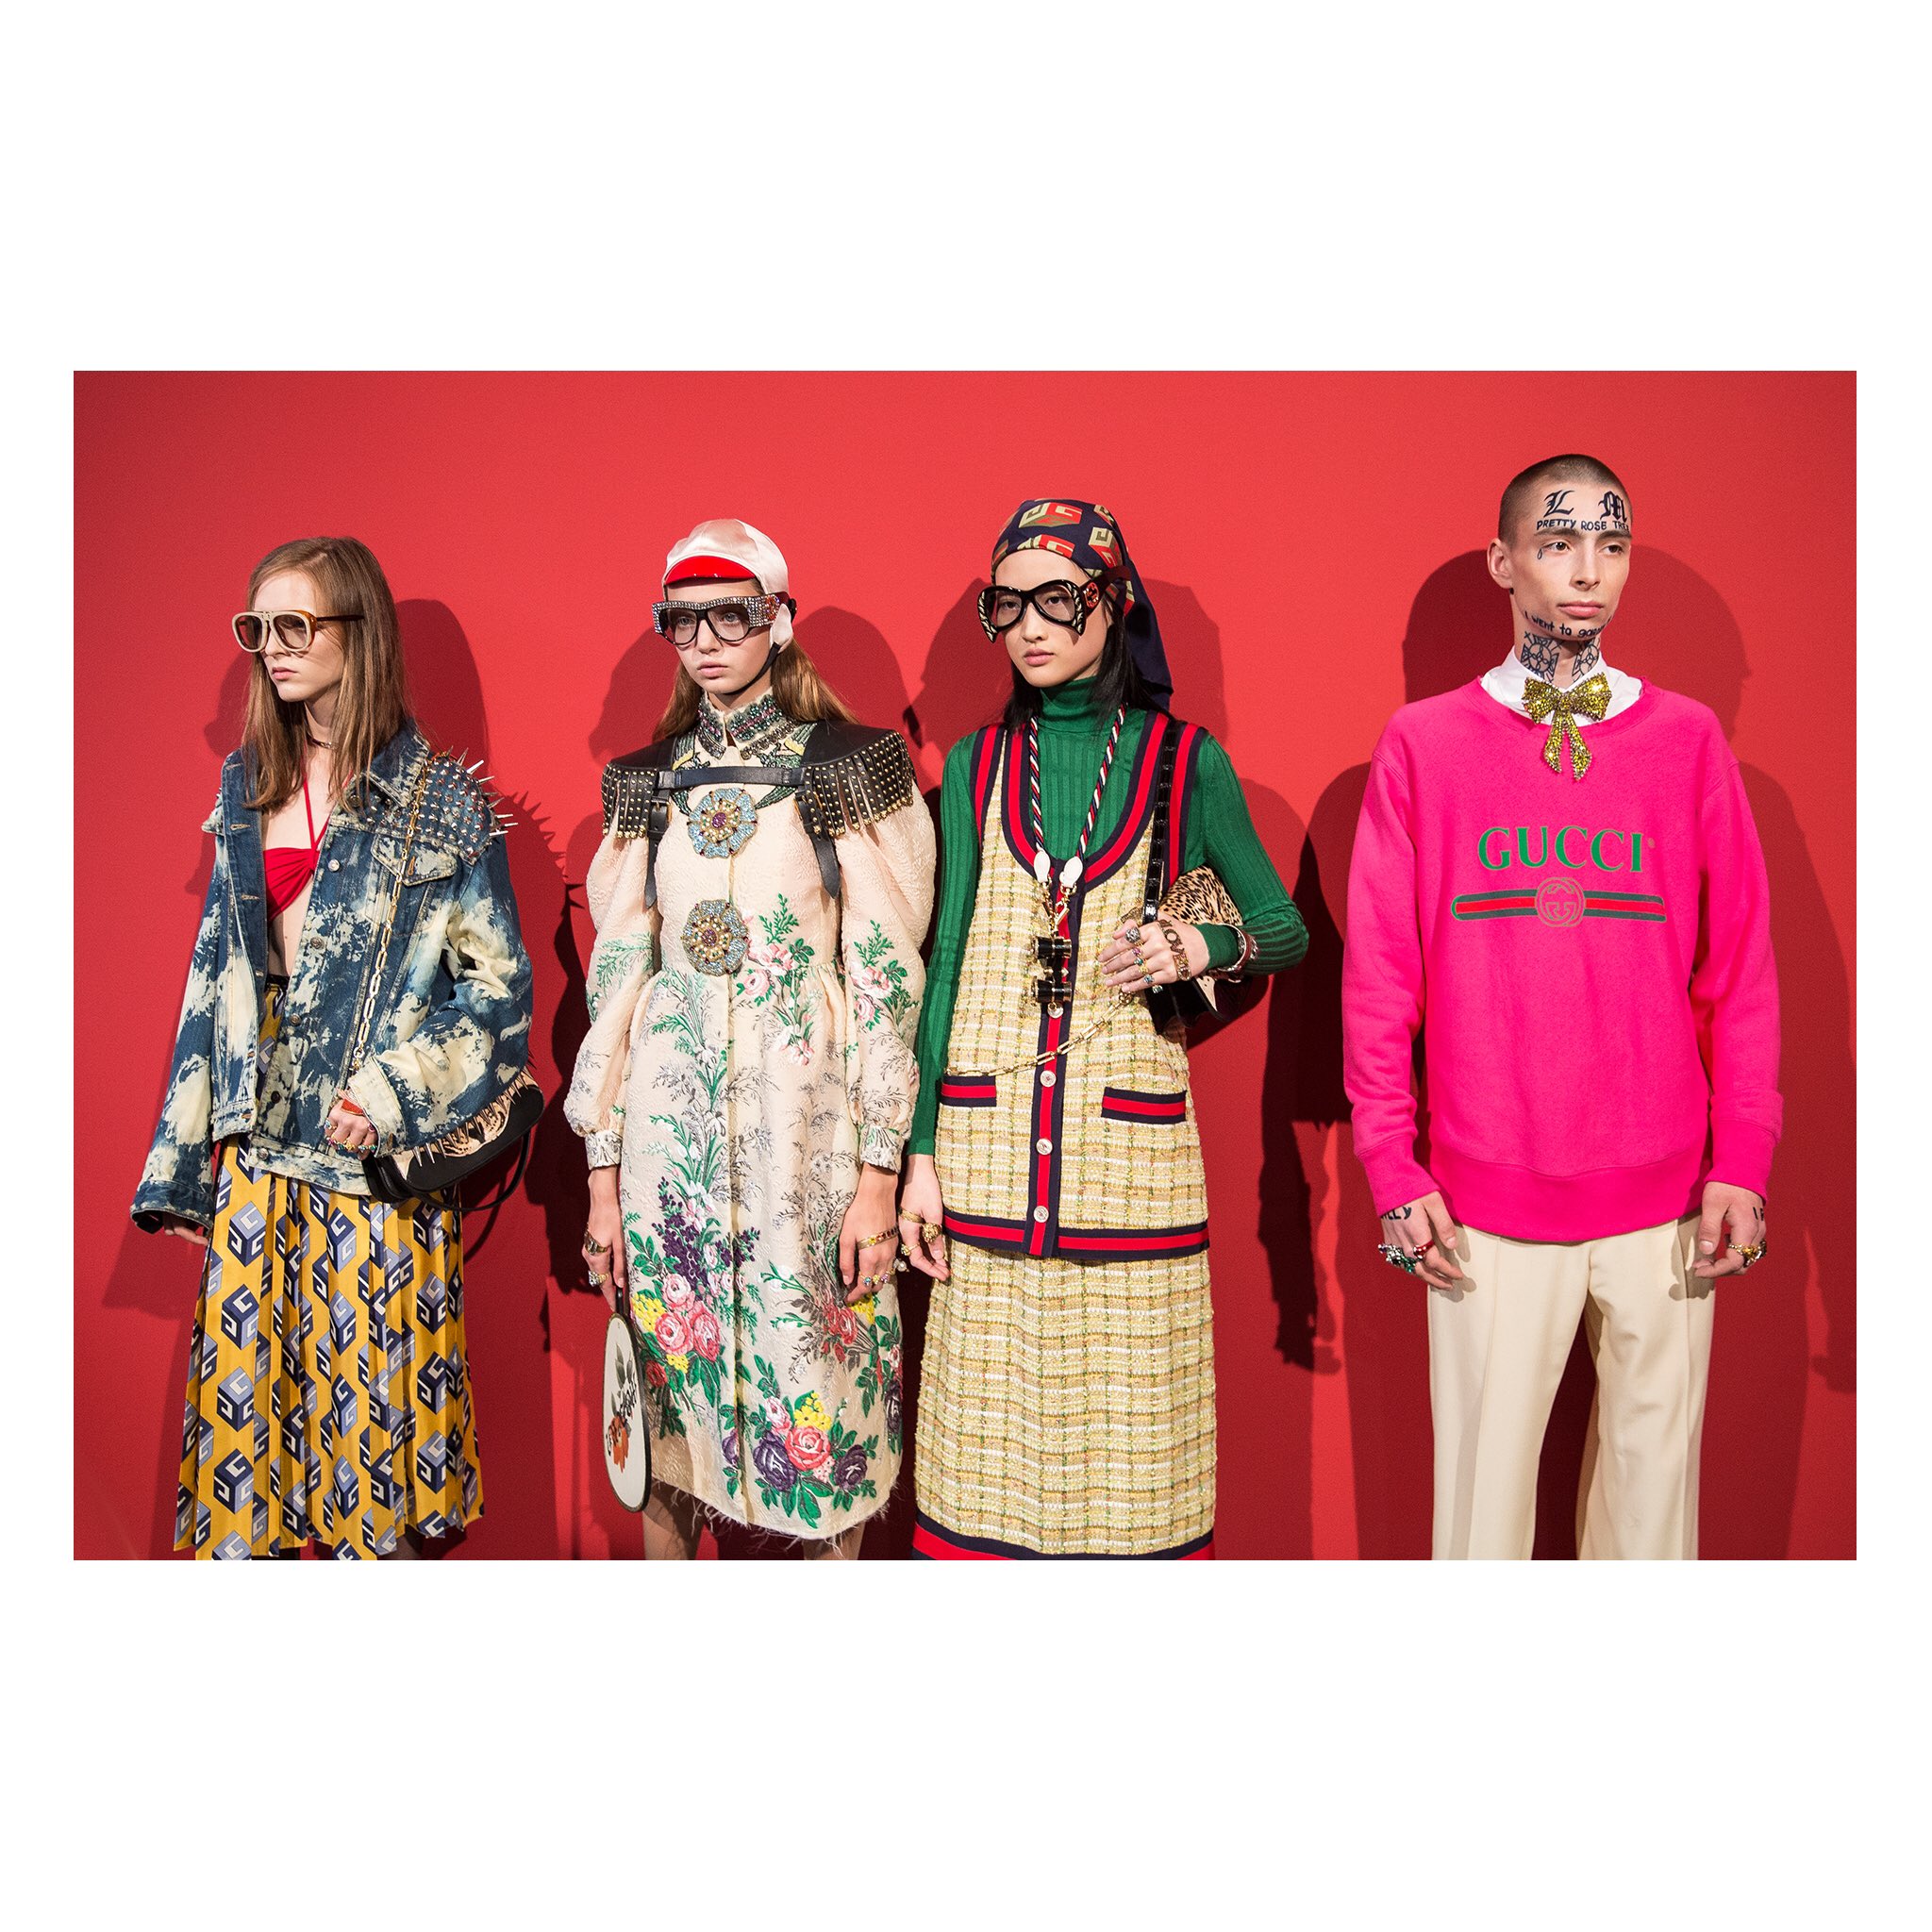 Tien jaar landinwaarts Indringing gucci on Twitter: "Eclectic characters of the women's #GucciSS17 fashion  show by #AlessandroMichele. https://t.co/tHayrJj3Gv" / Twitter